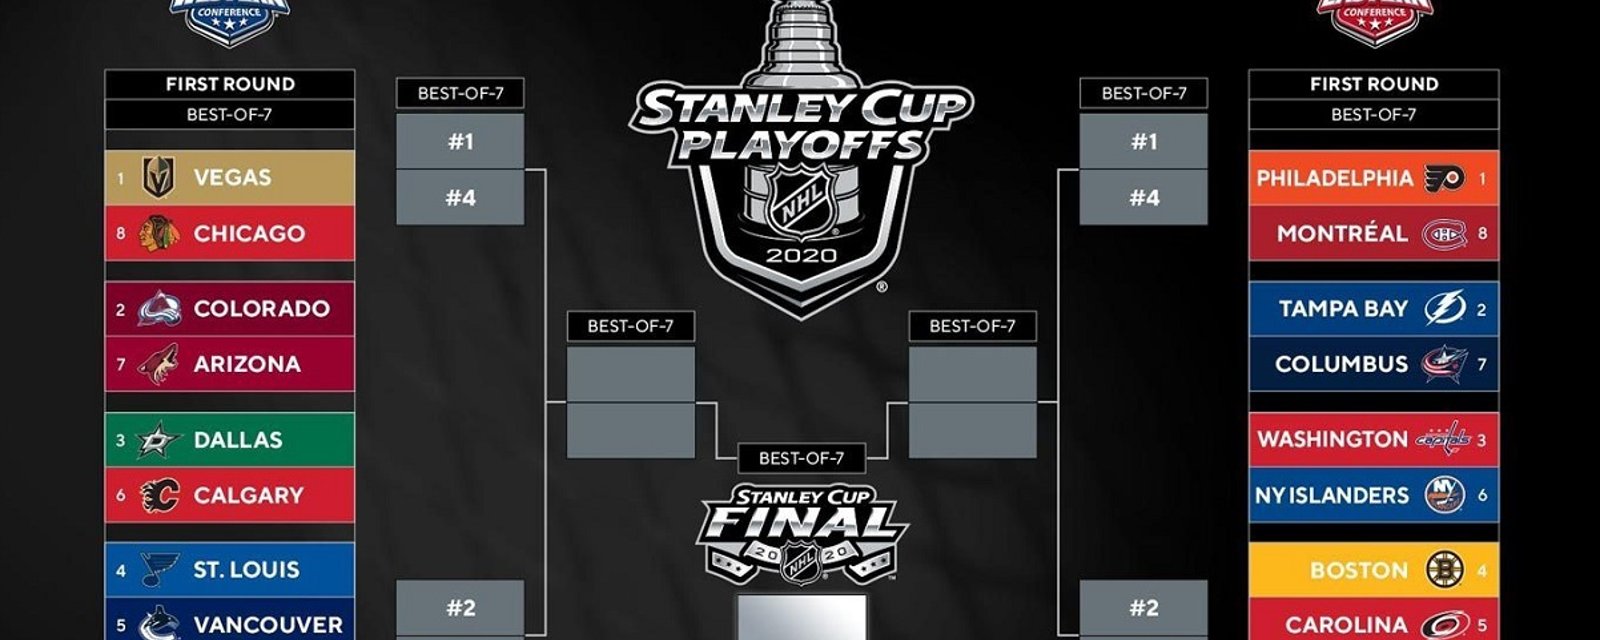 Full schedule for Round 1 of the playoffs.